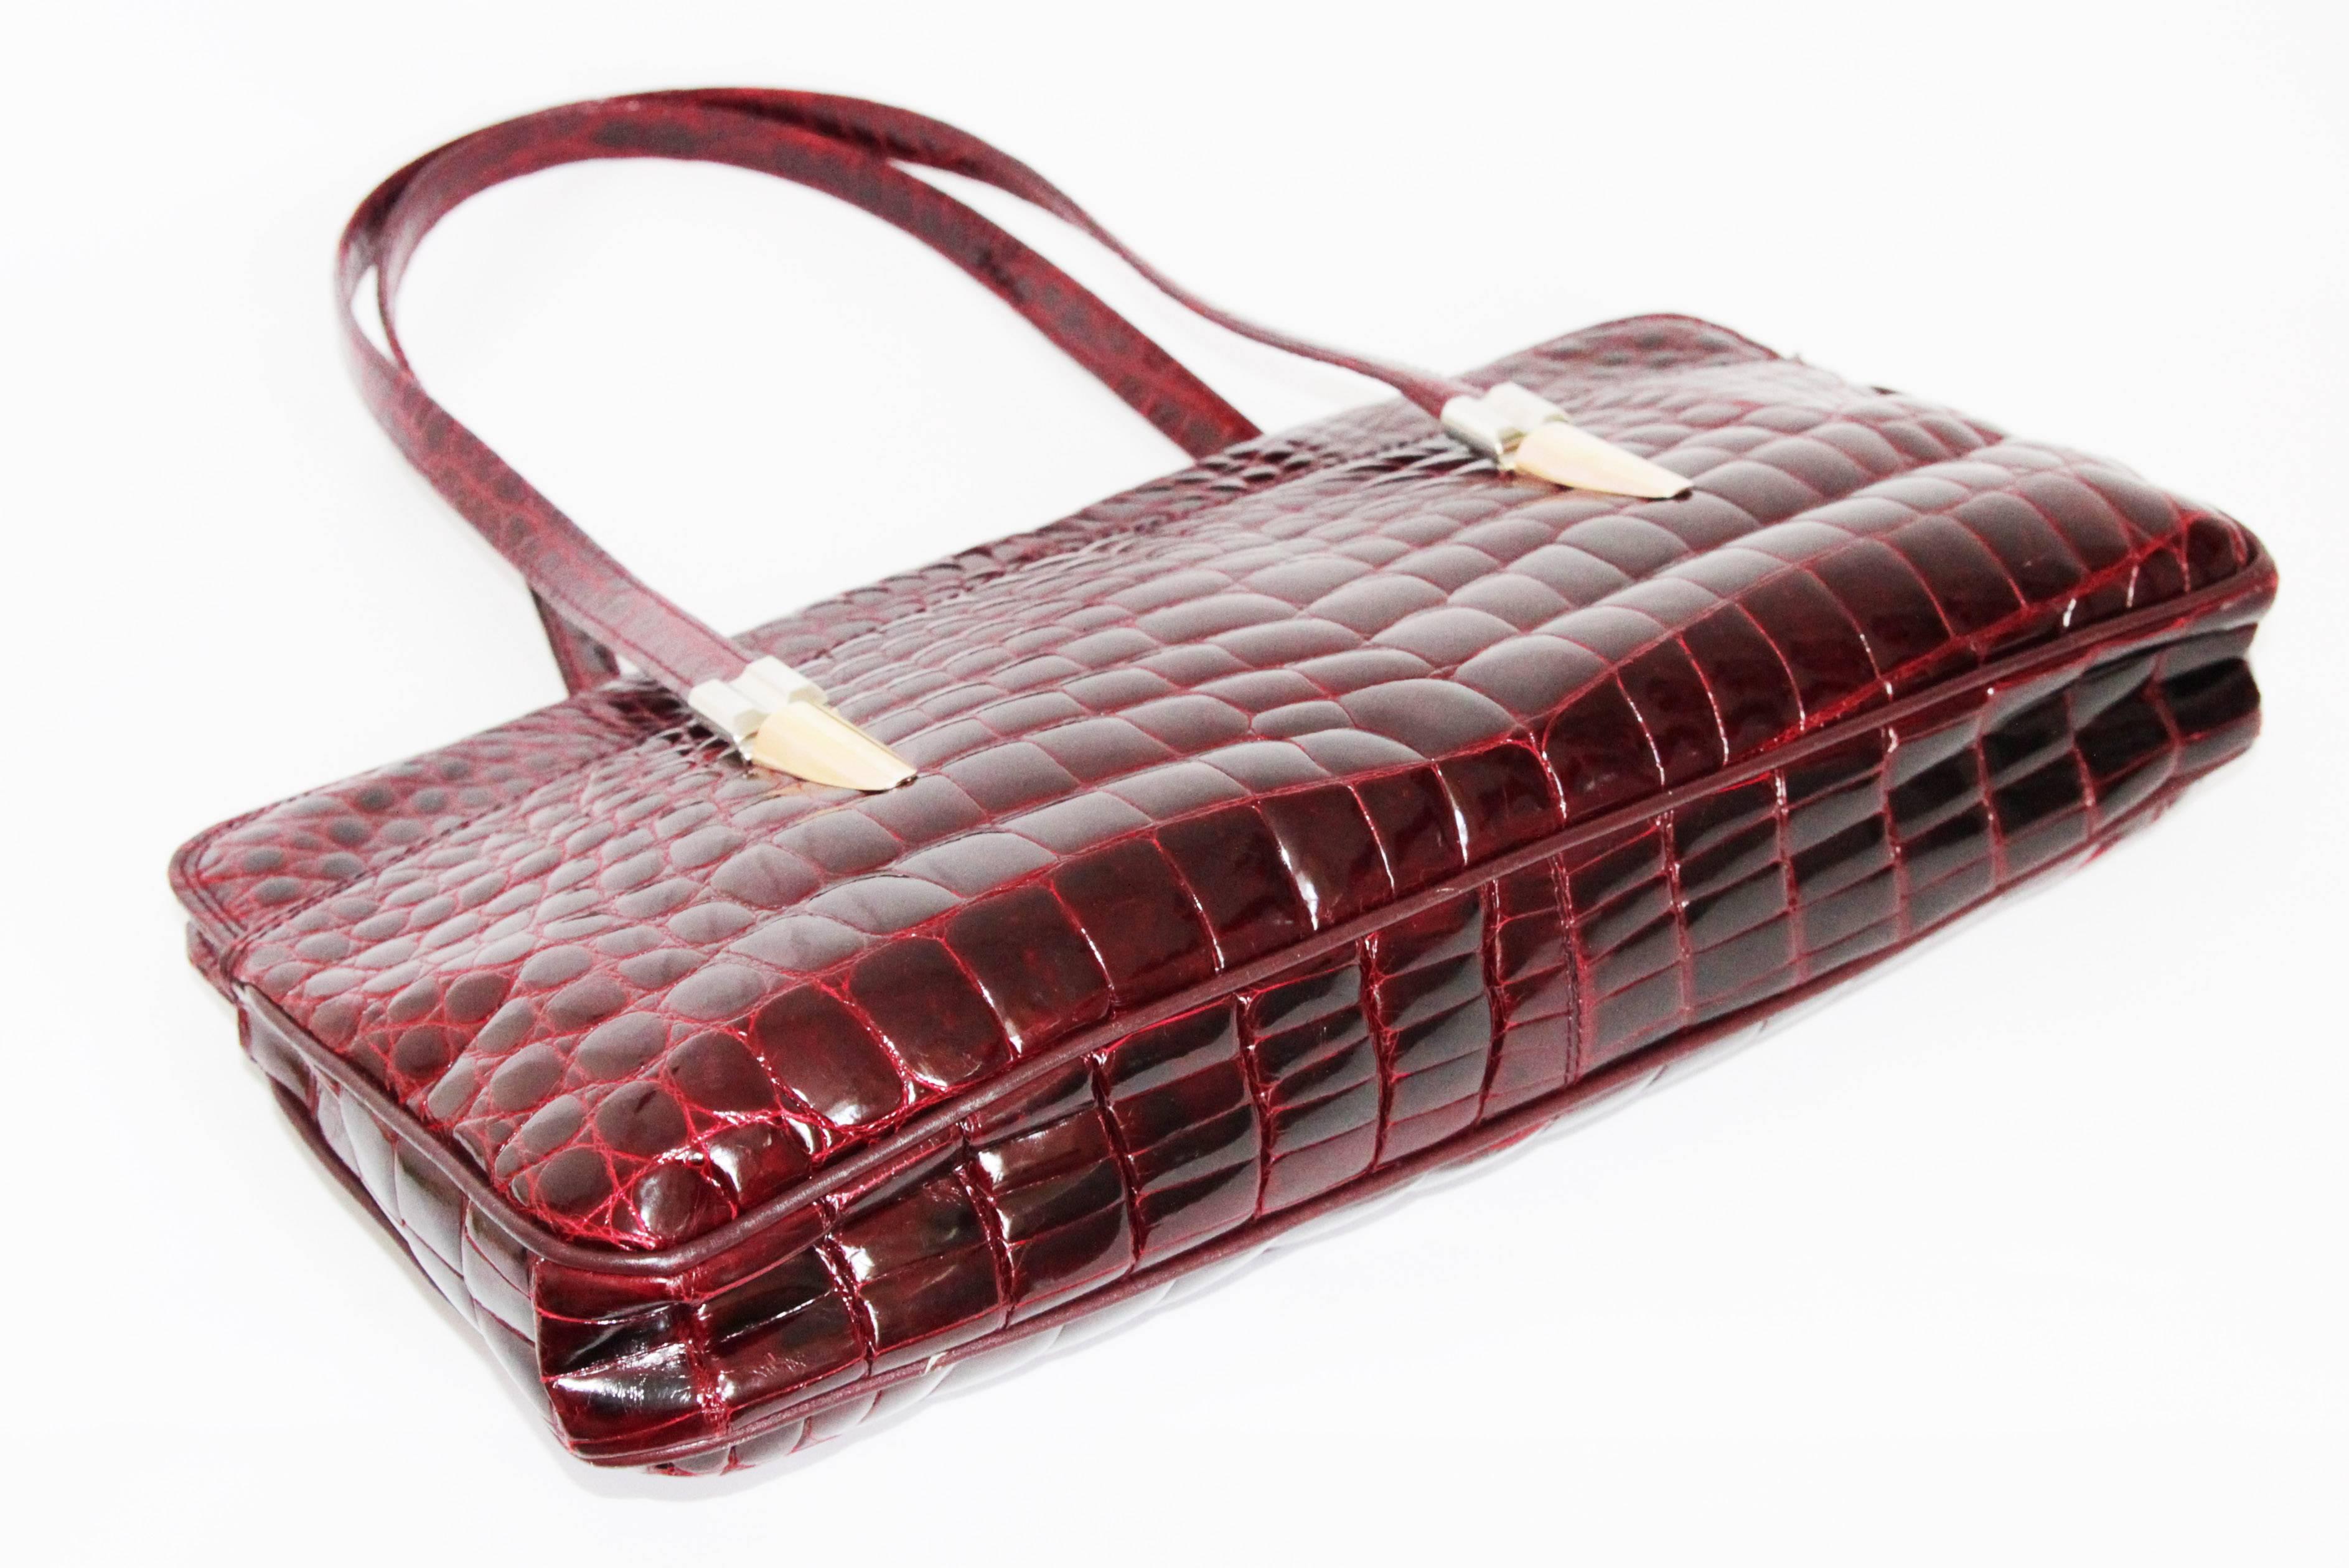 Exceptional & large burgundy crocodile leather handbag made by Colombo Italy, bi-color hardware finishing. Fabulous quality & very pratical size, shoulder. Excellent condition. Size: 39.5 x 22 x 6 cm - 15.5 x 8 2/3 x 2 1/3 in. 